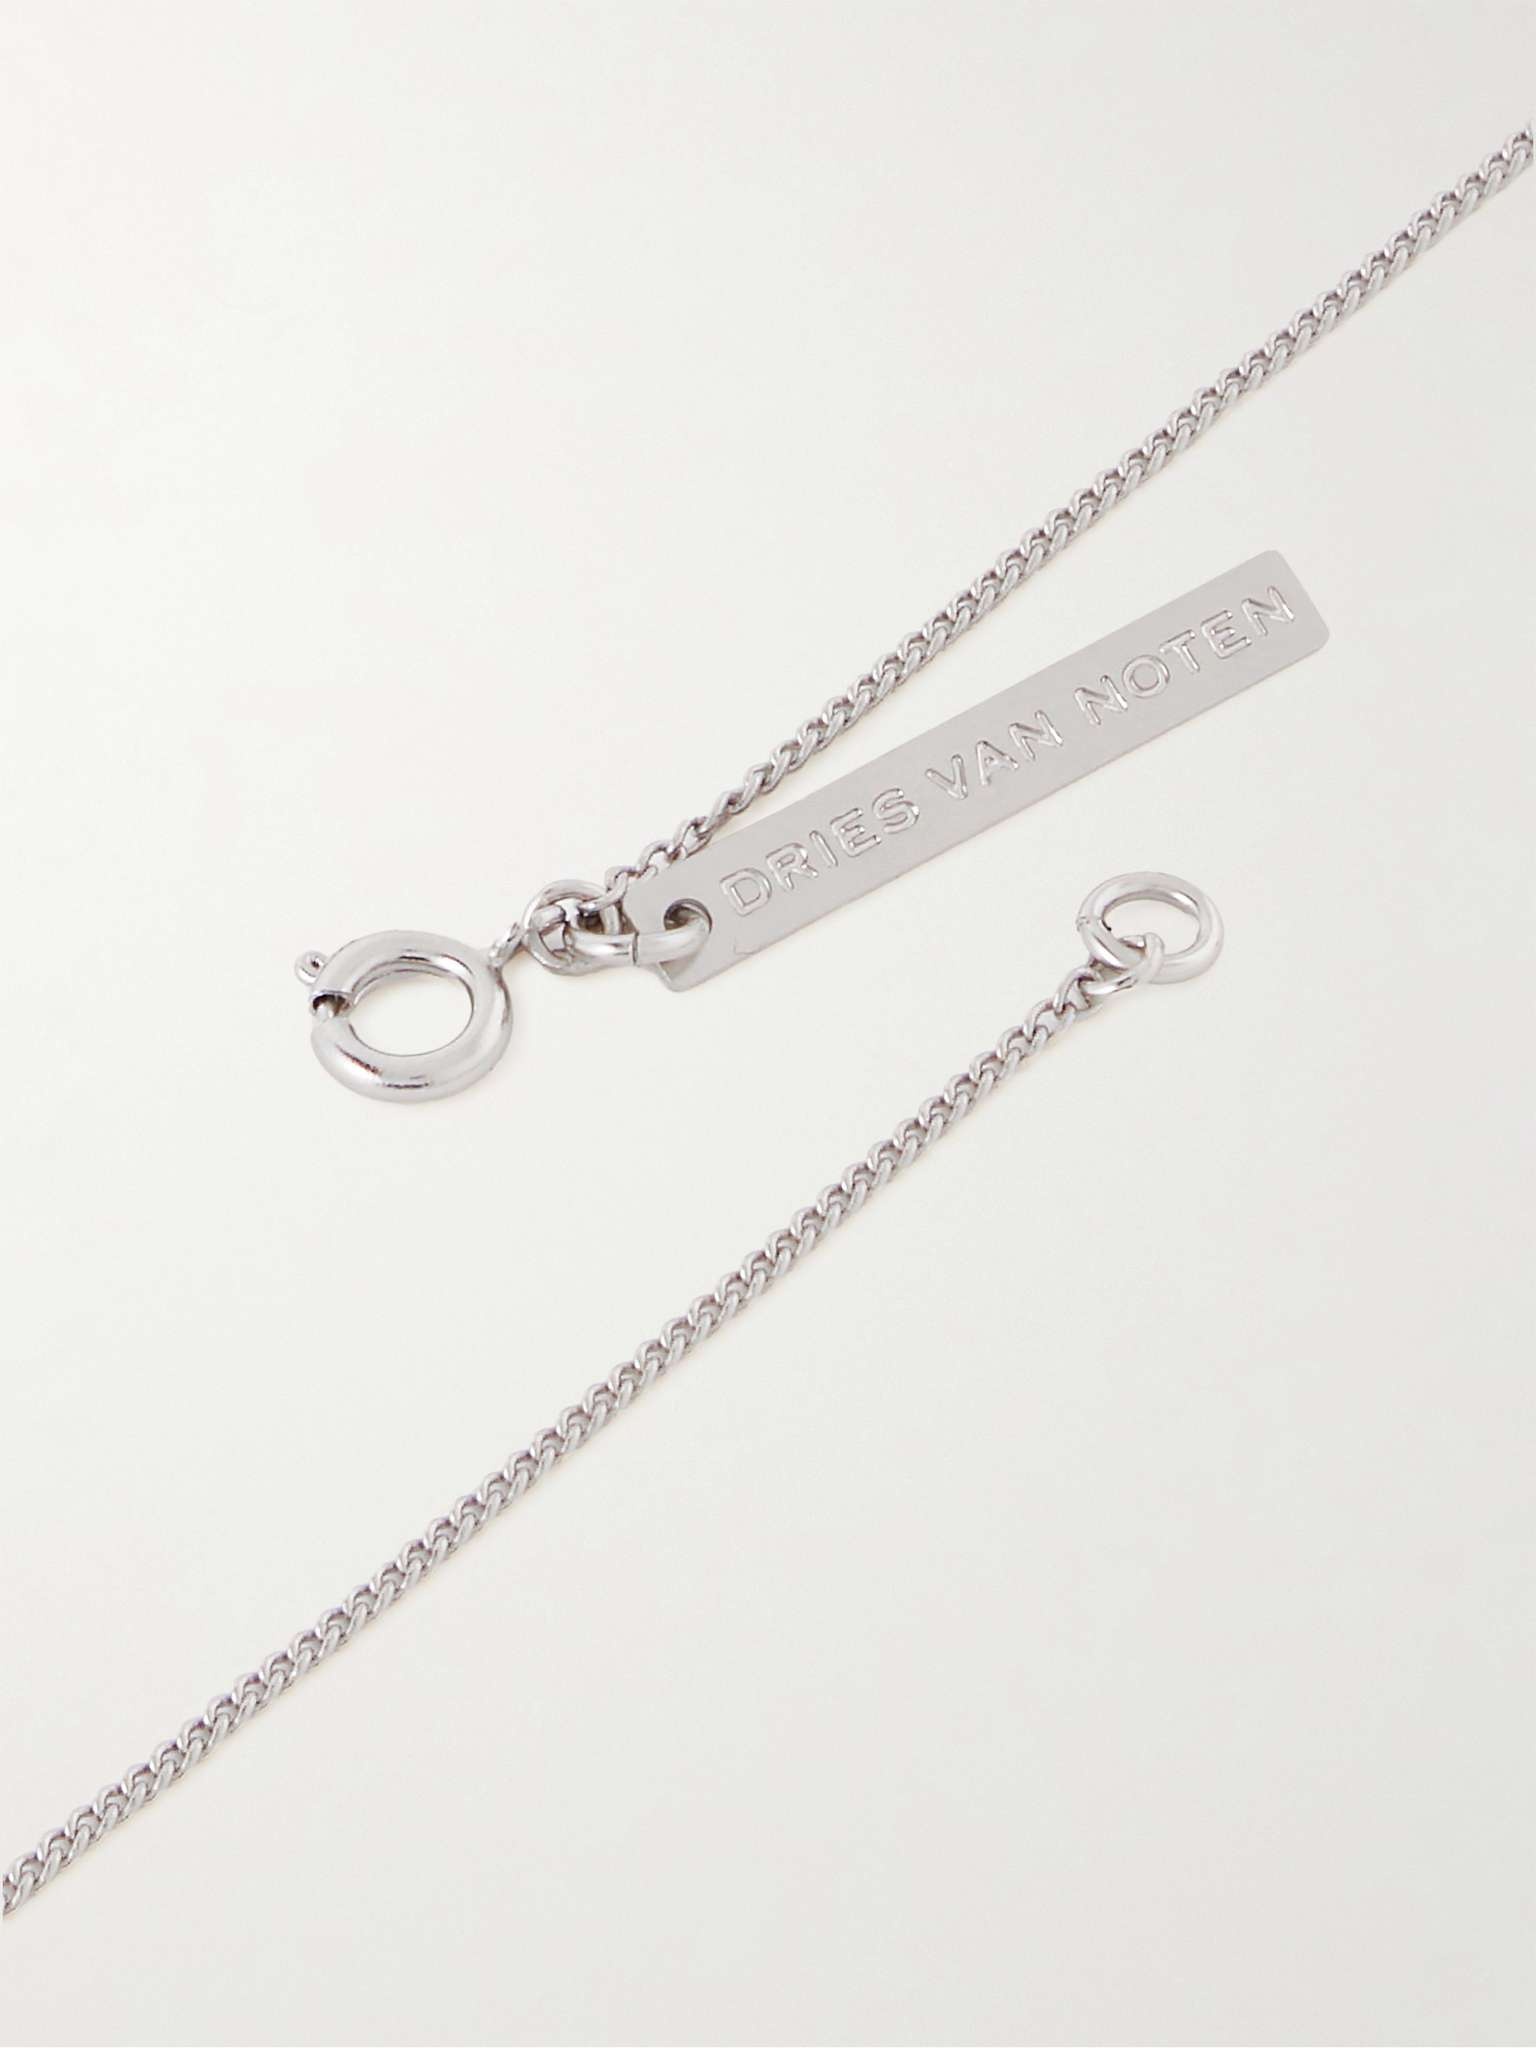 Silver-Tone and Enamel Chain Necklace - 3